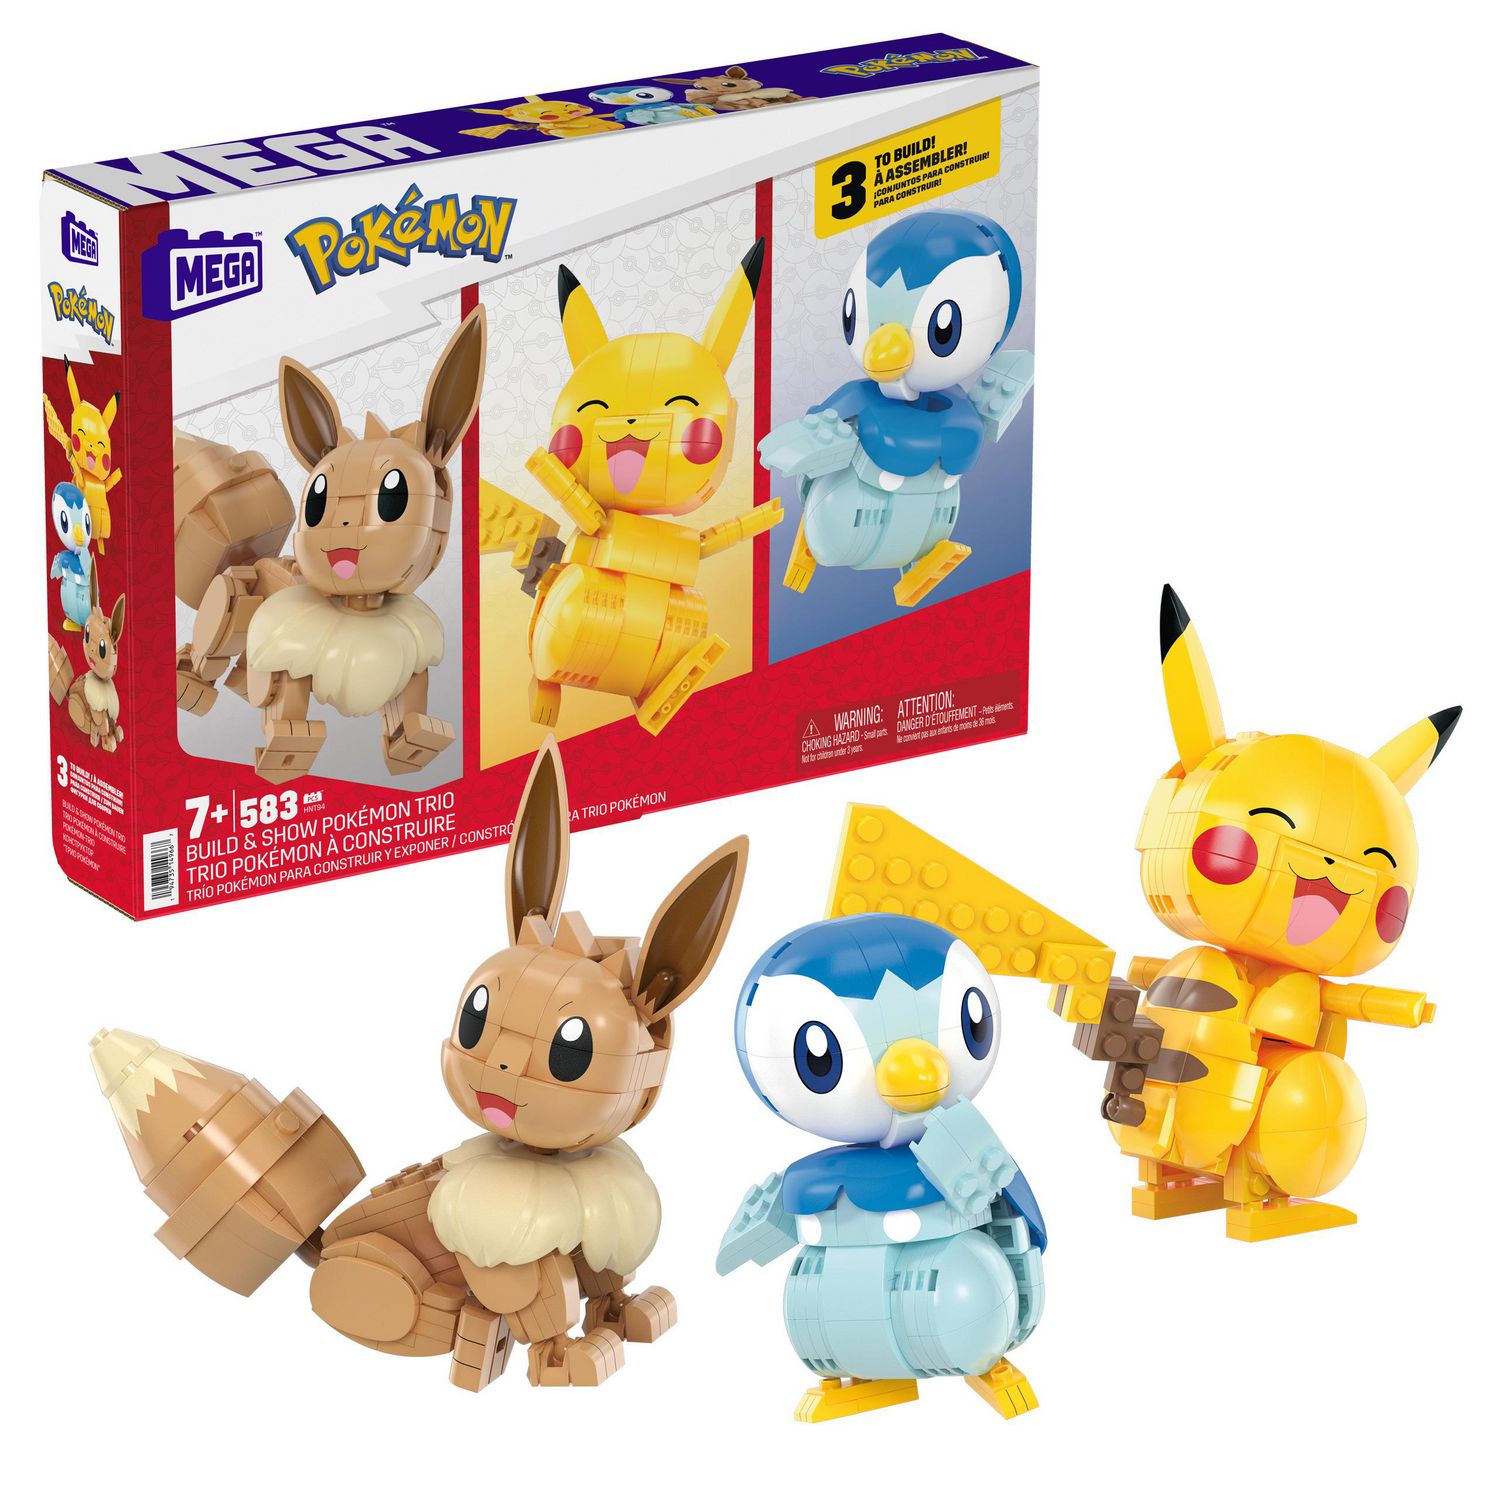 MEGA Pokémon Action Figure Building Toy Set for Kids, Jumbo Pikachu with  825 Pieces, 12 Inches Tall, Age 8+ Years ( Exclusive)